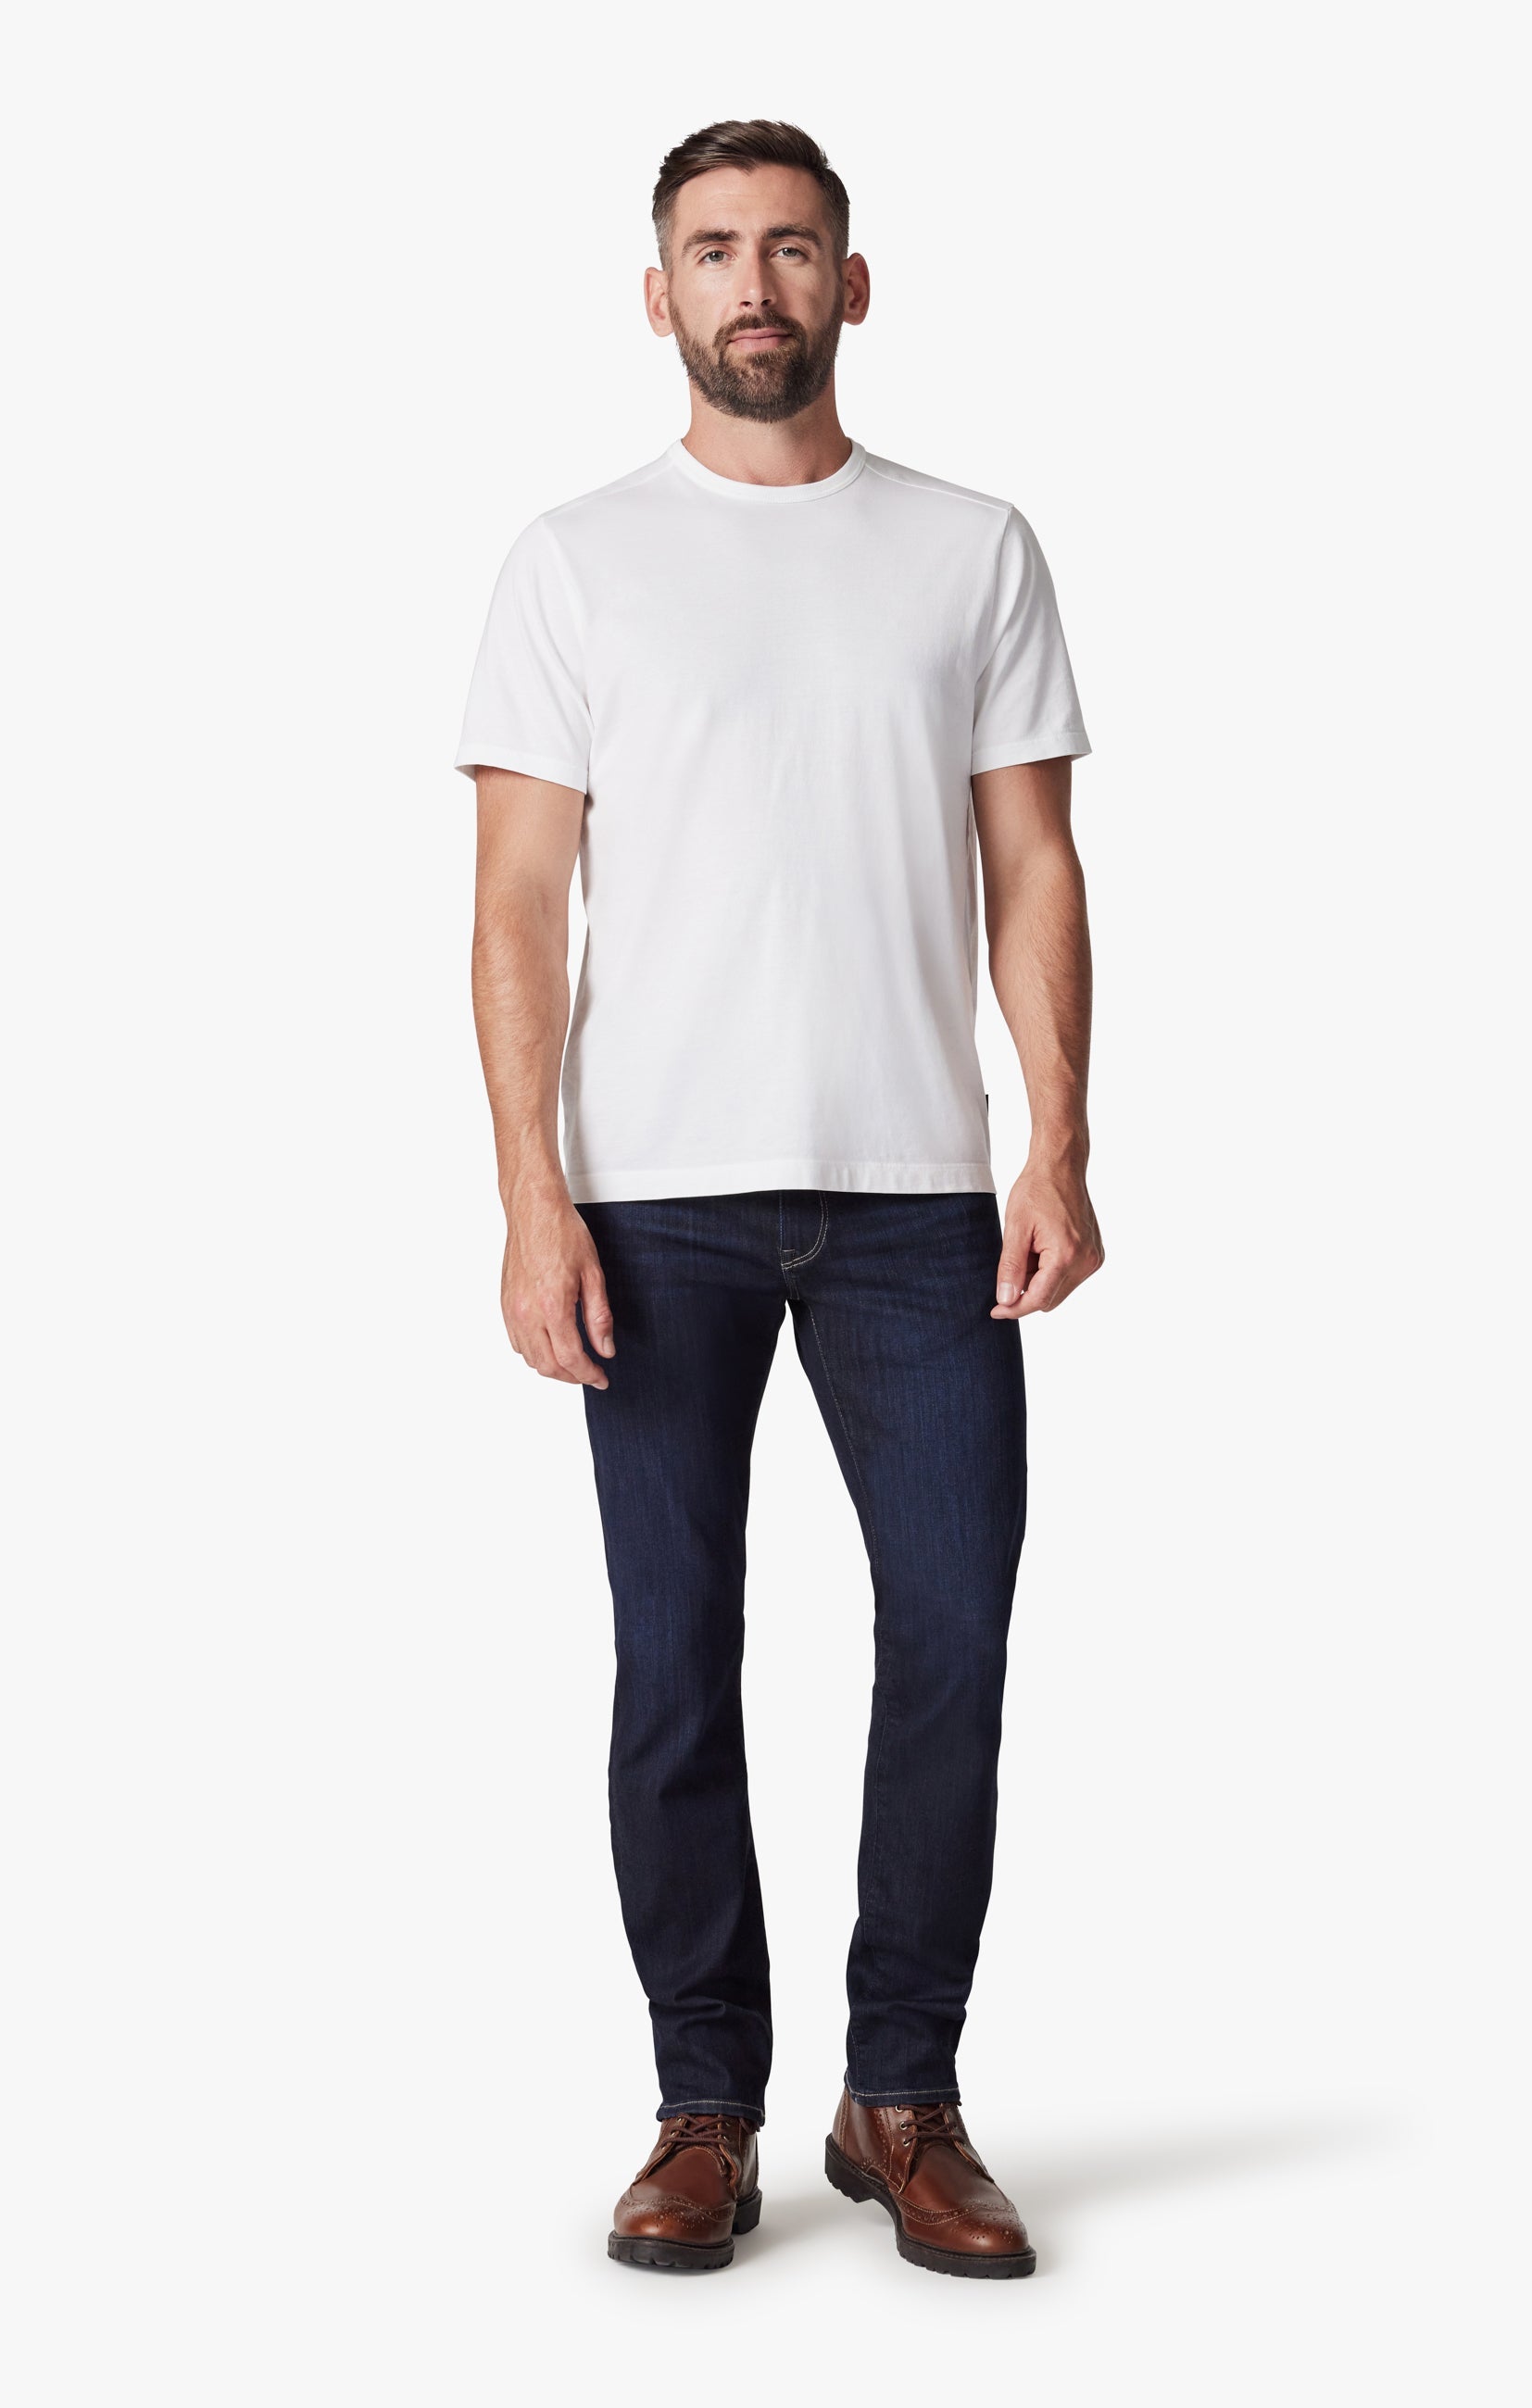 Champ Athletic Fit Jeans in Deep Refined Image 1